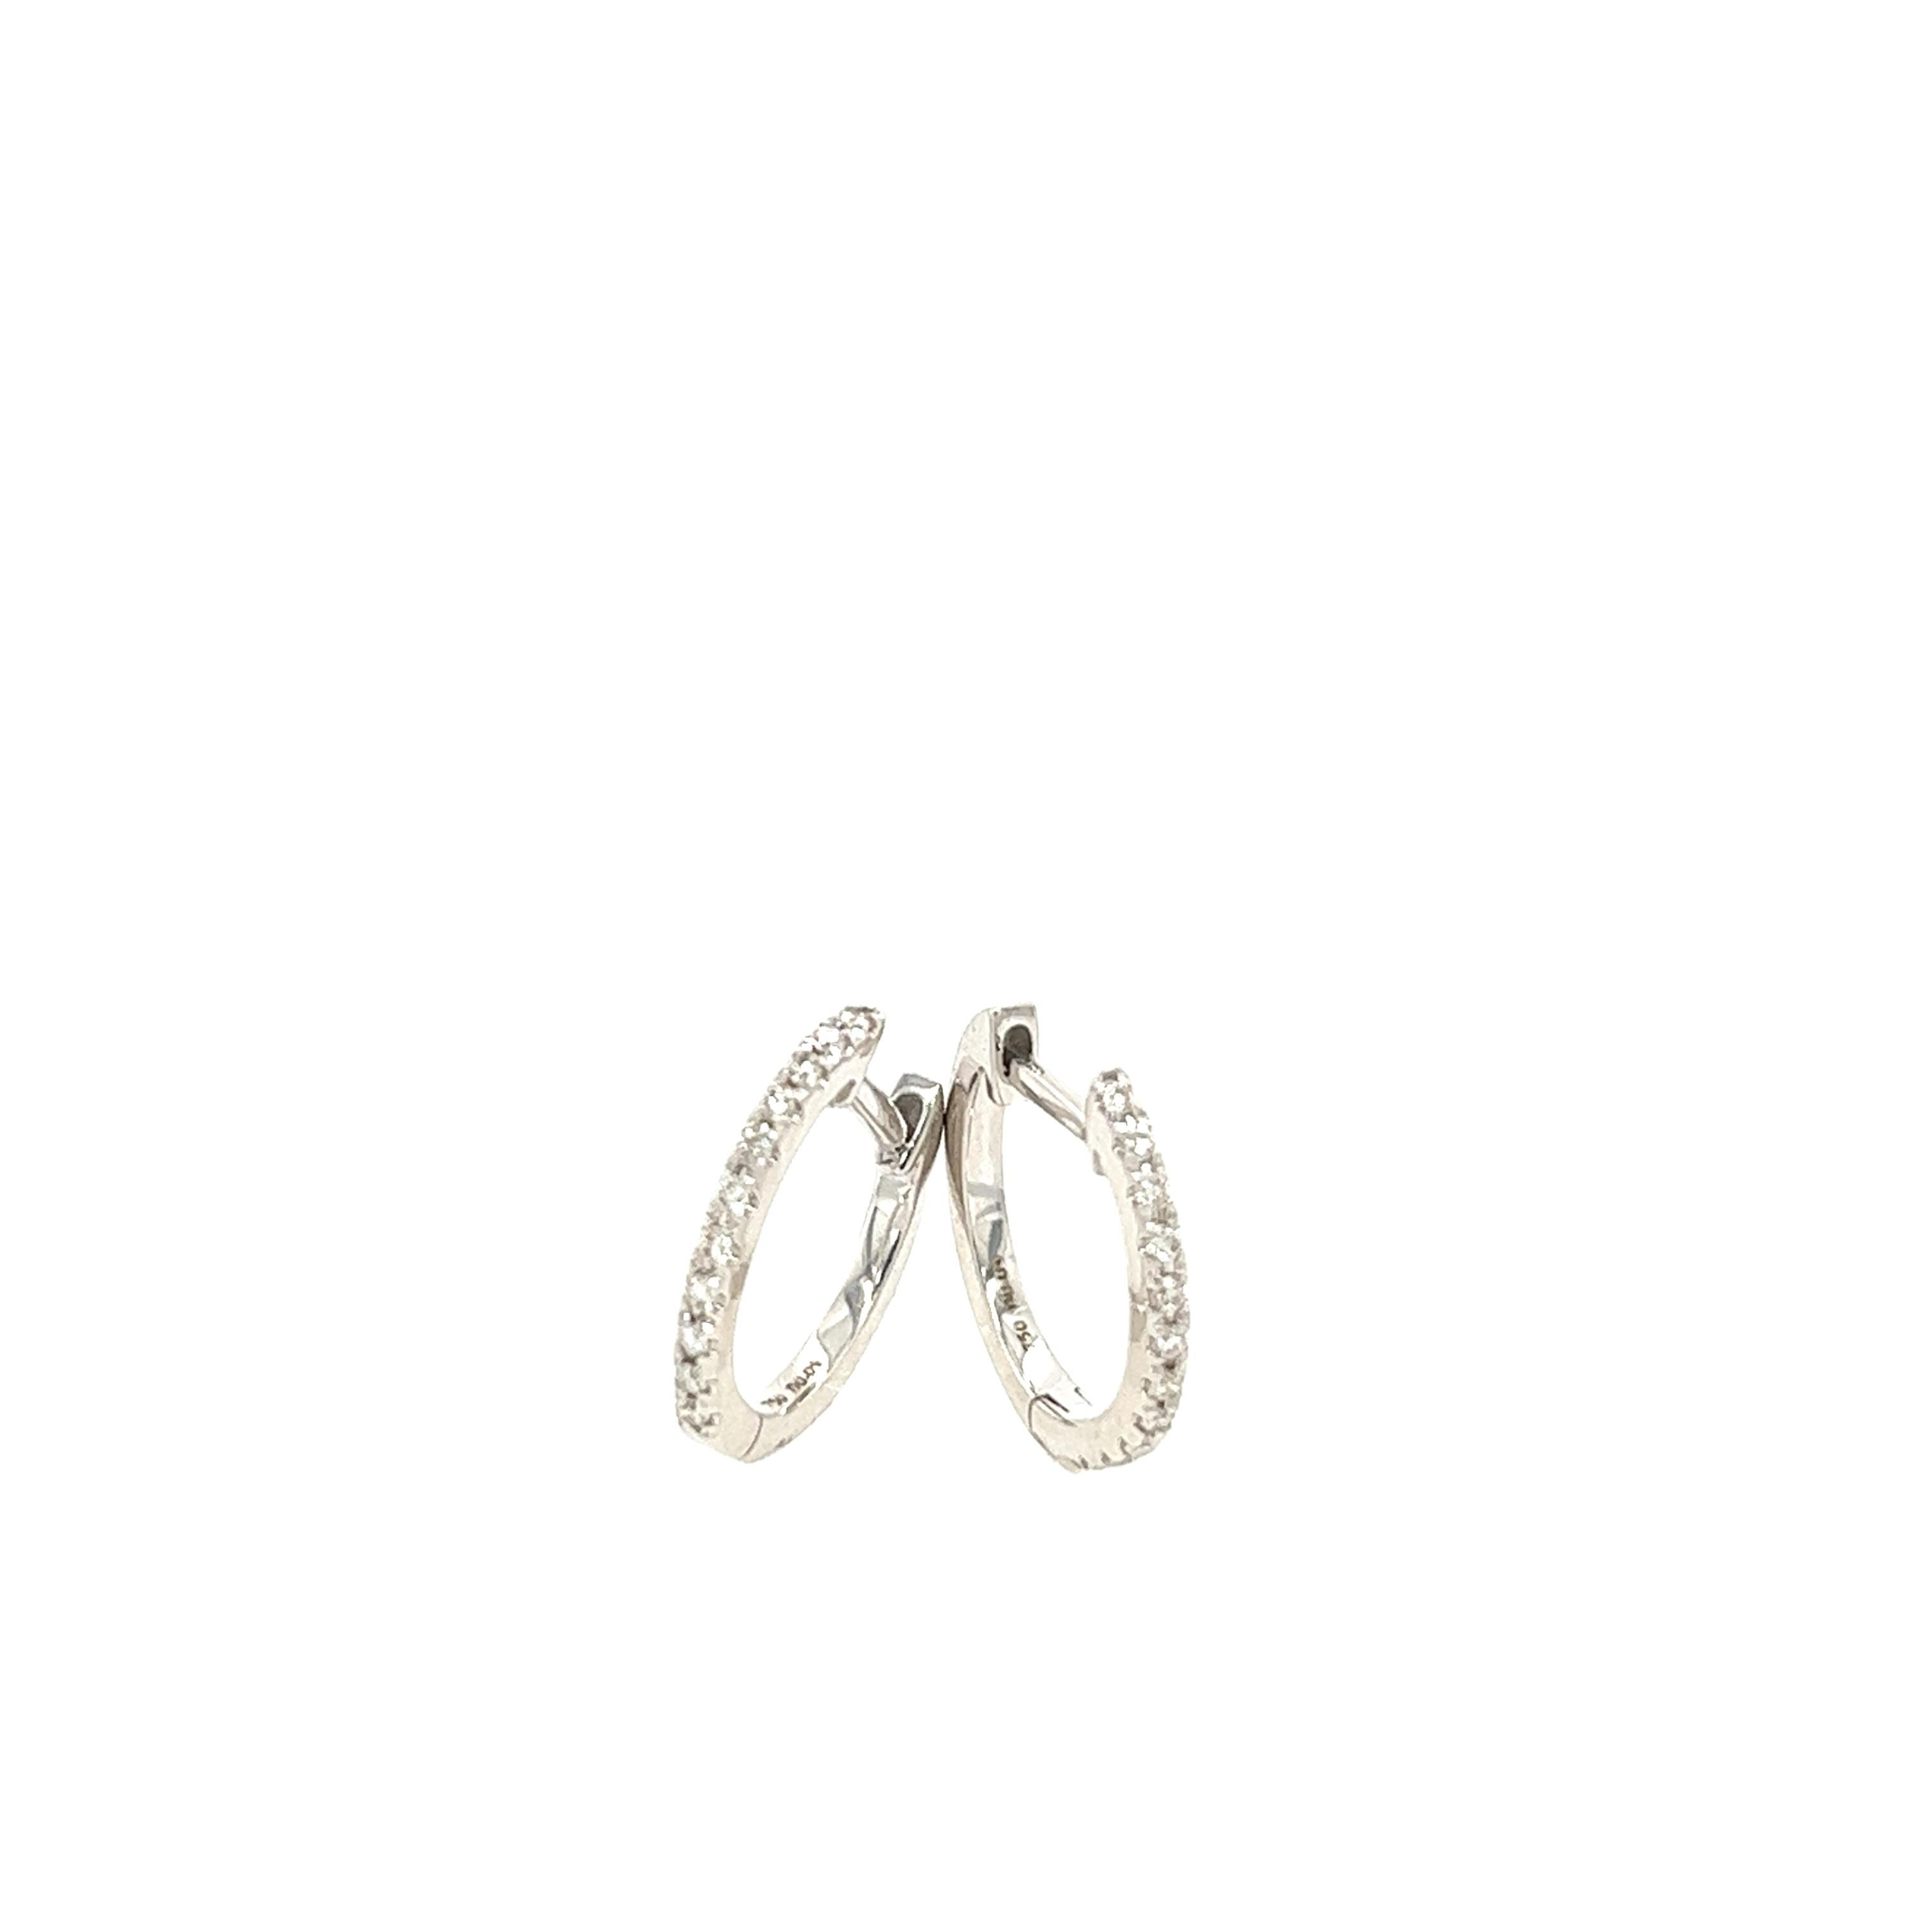 
These earrings measure 11mm in diameter and are set with 0.09ct of round diamonds. They are a great choice for women who love to wear jewellery that is both classy and elegant. These earrings are a perfect choice for any occasion.

Total Diamond